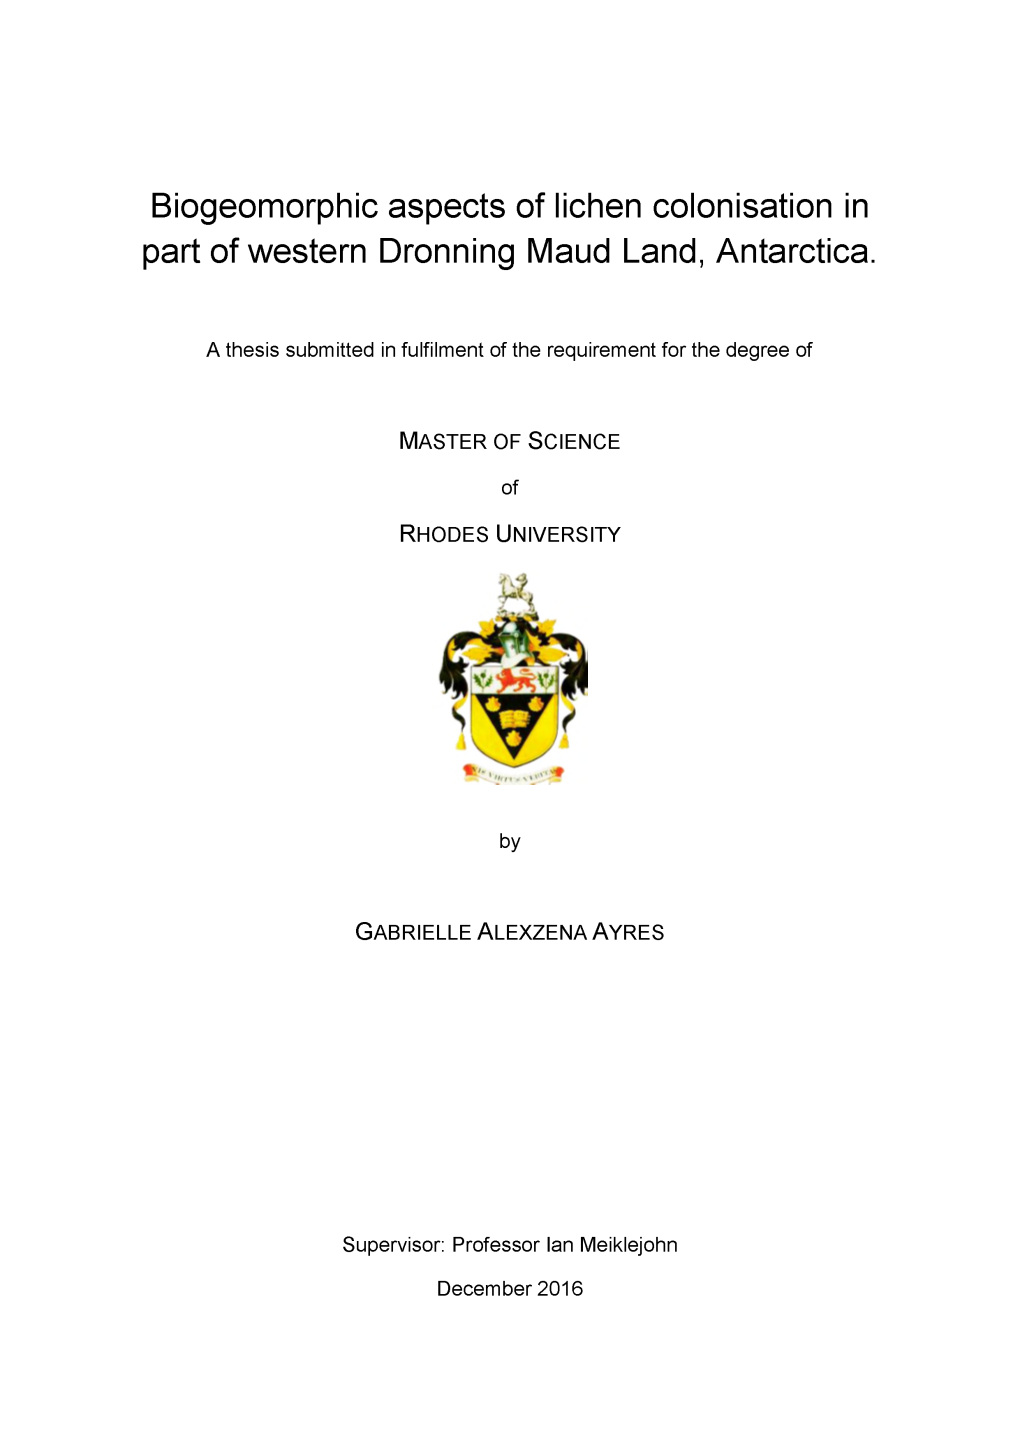 Biogeomorphic Aspects of Lichen Colonisation in Part of Western Dronning Maud Land, Antarctica